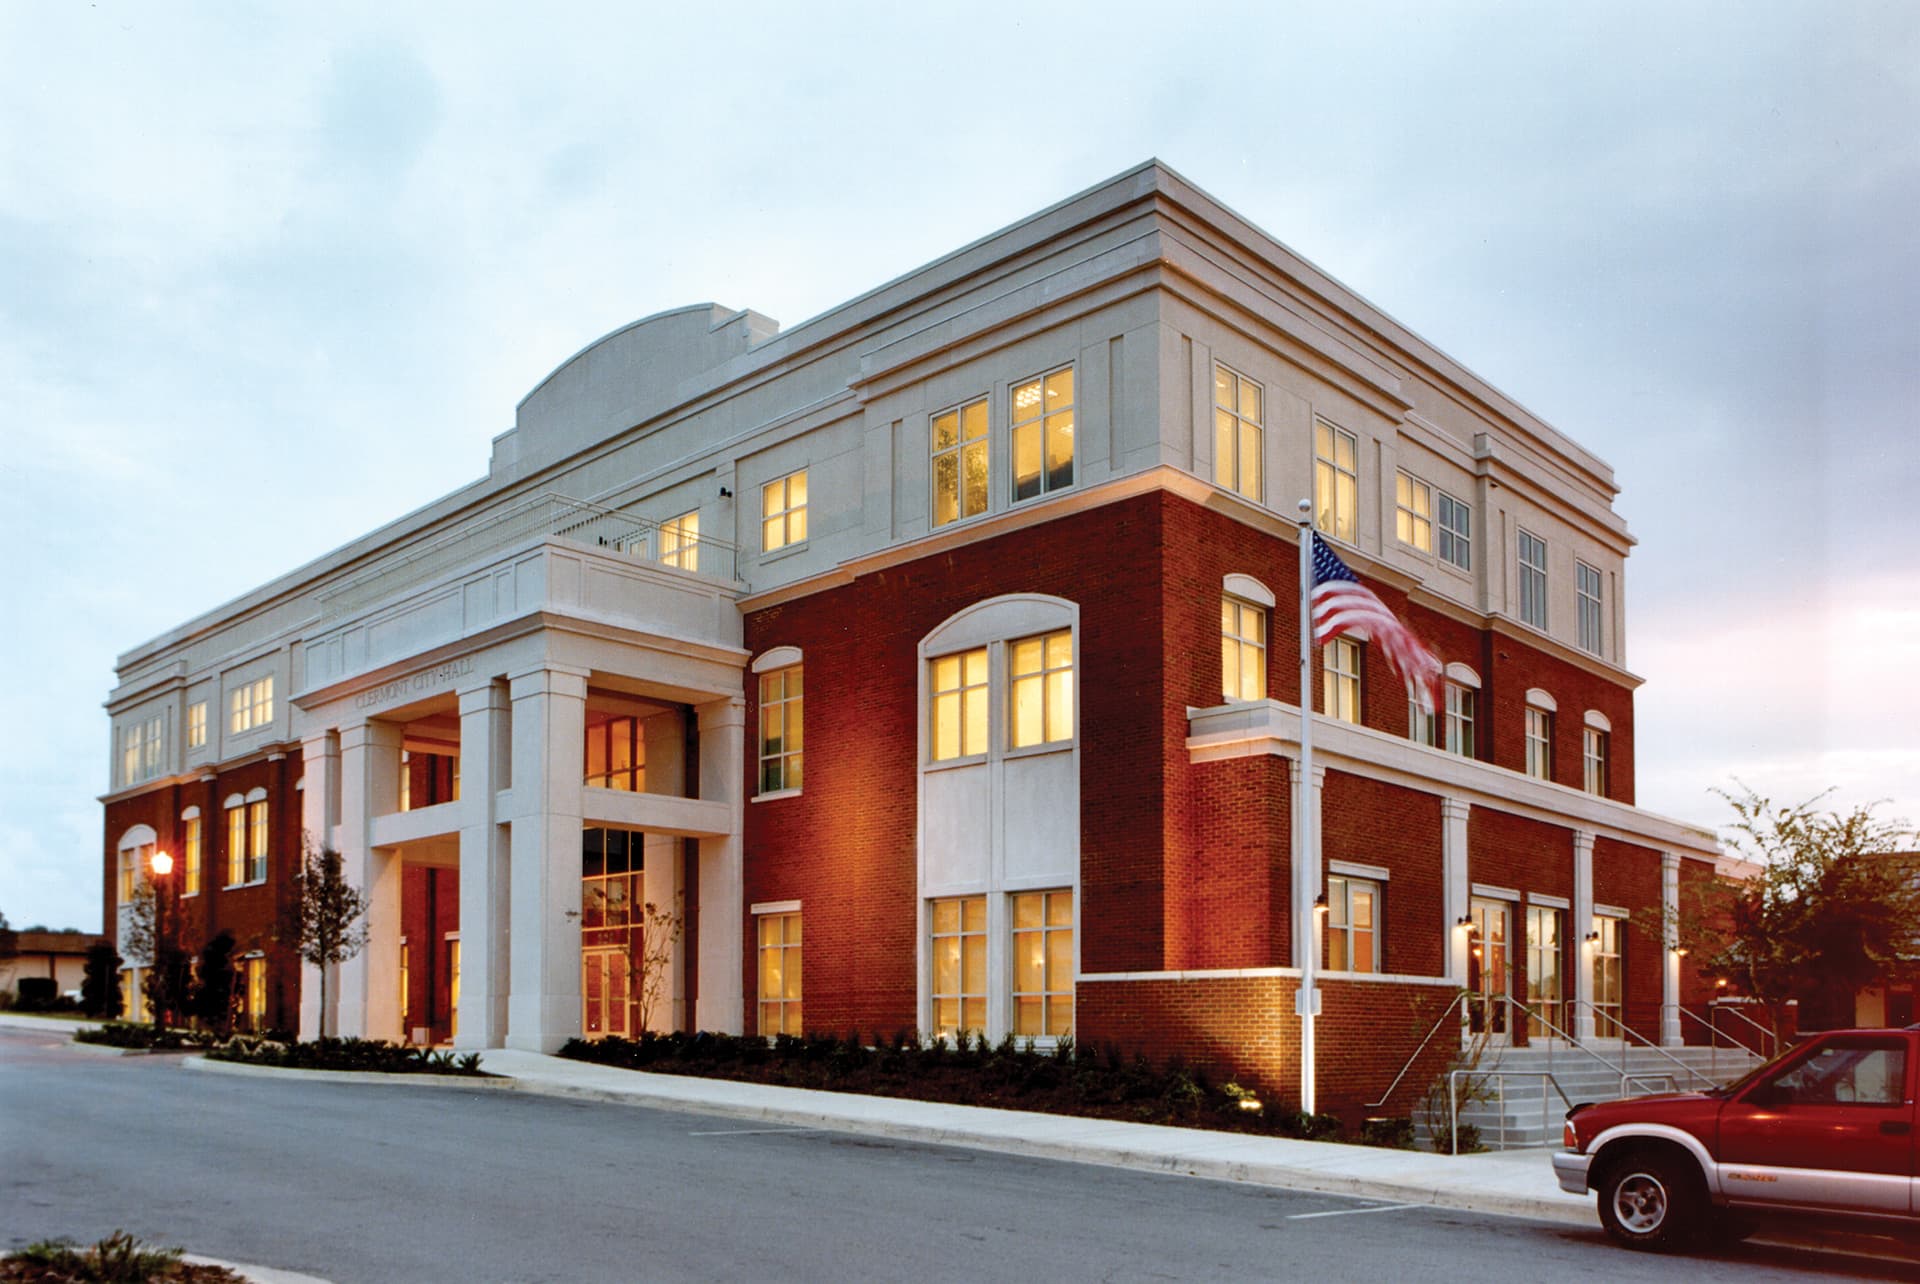 Exterior image of City of Clermont City Hall